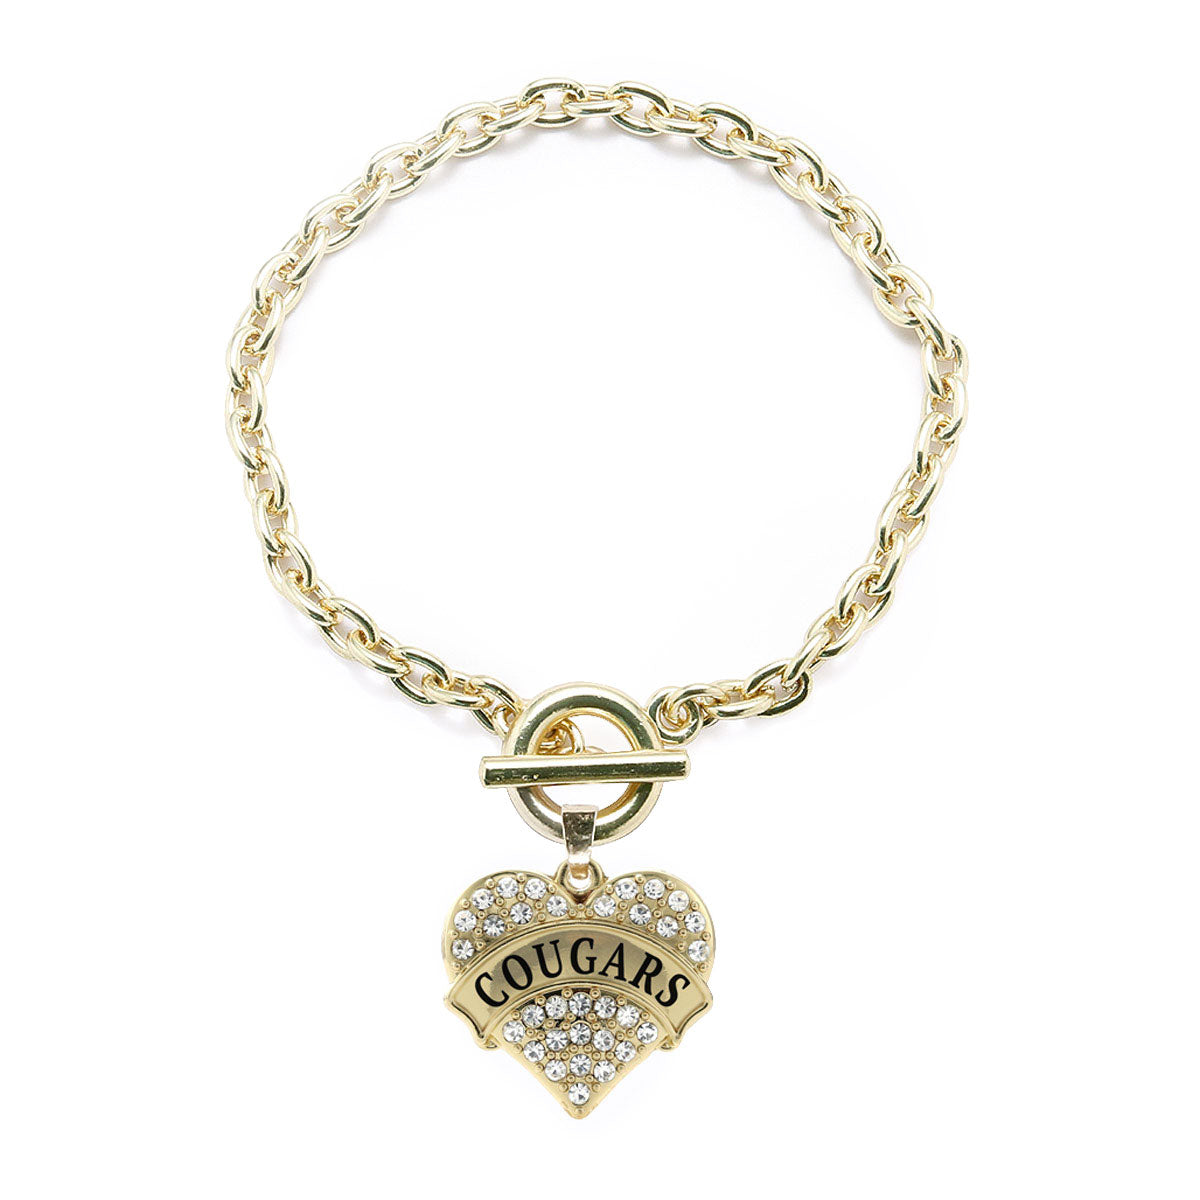 Gold Cougars Pave Heart Charm Toggle Bracelet